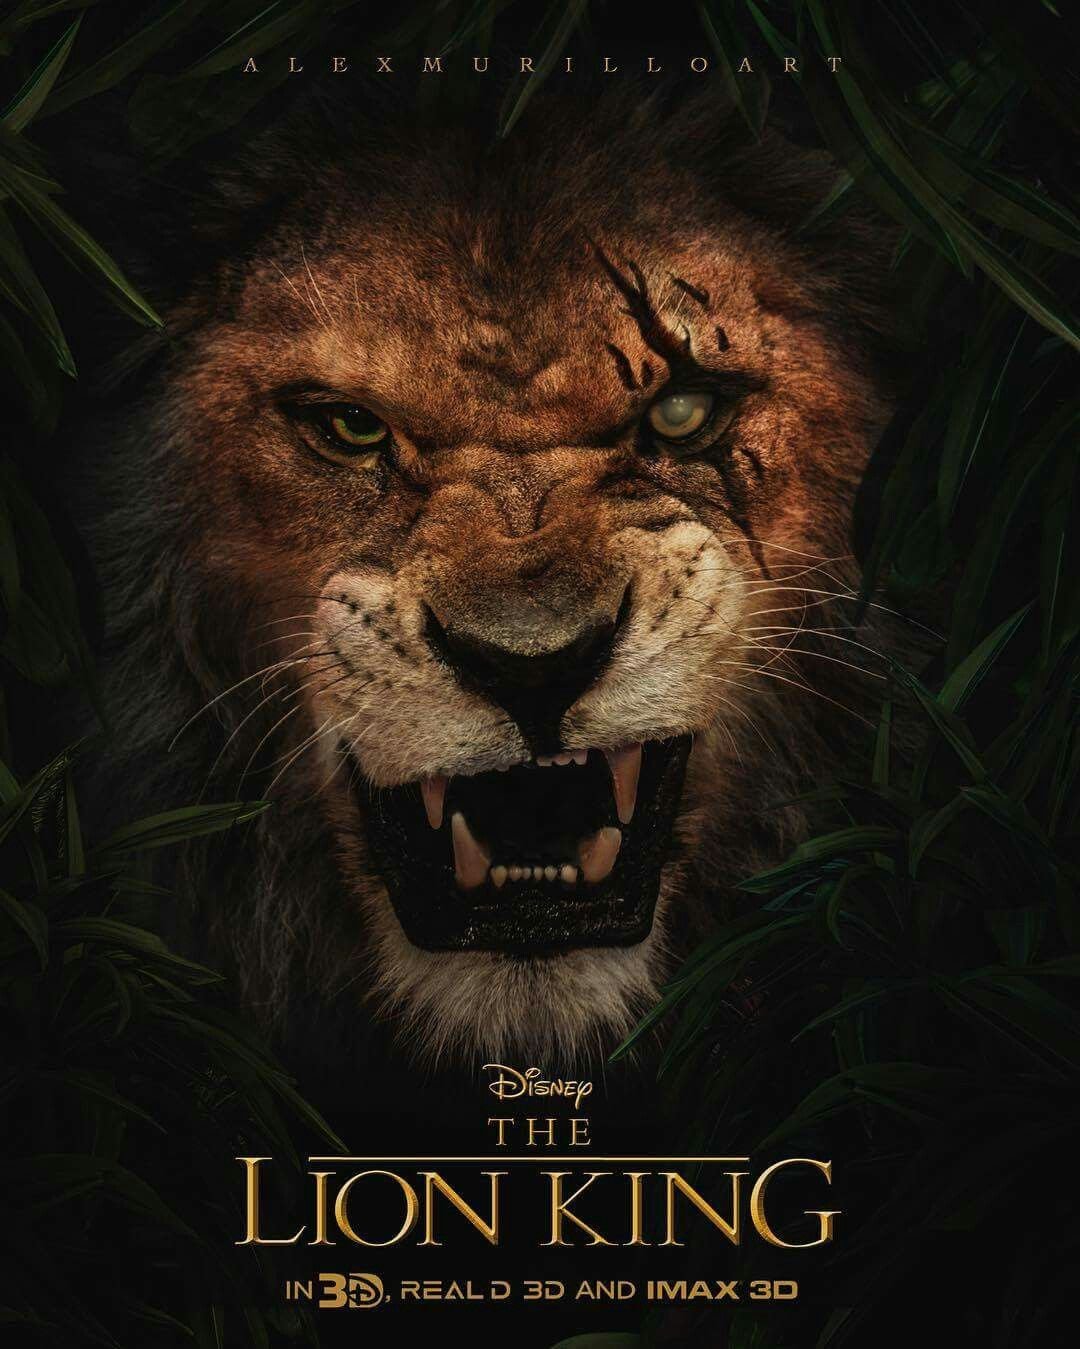 Let s Take A Look At The Very First Trailer Of The Lion King Remake